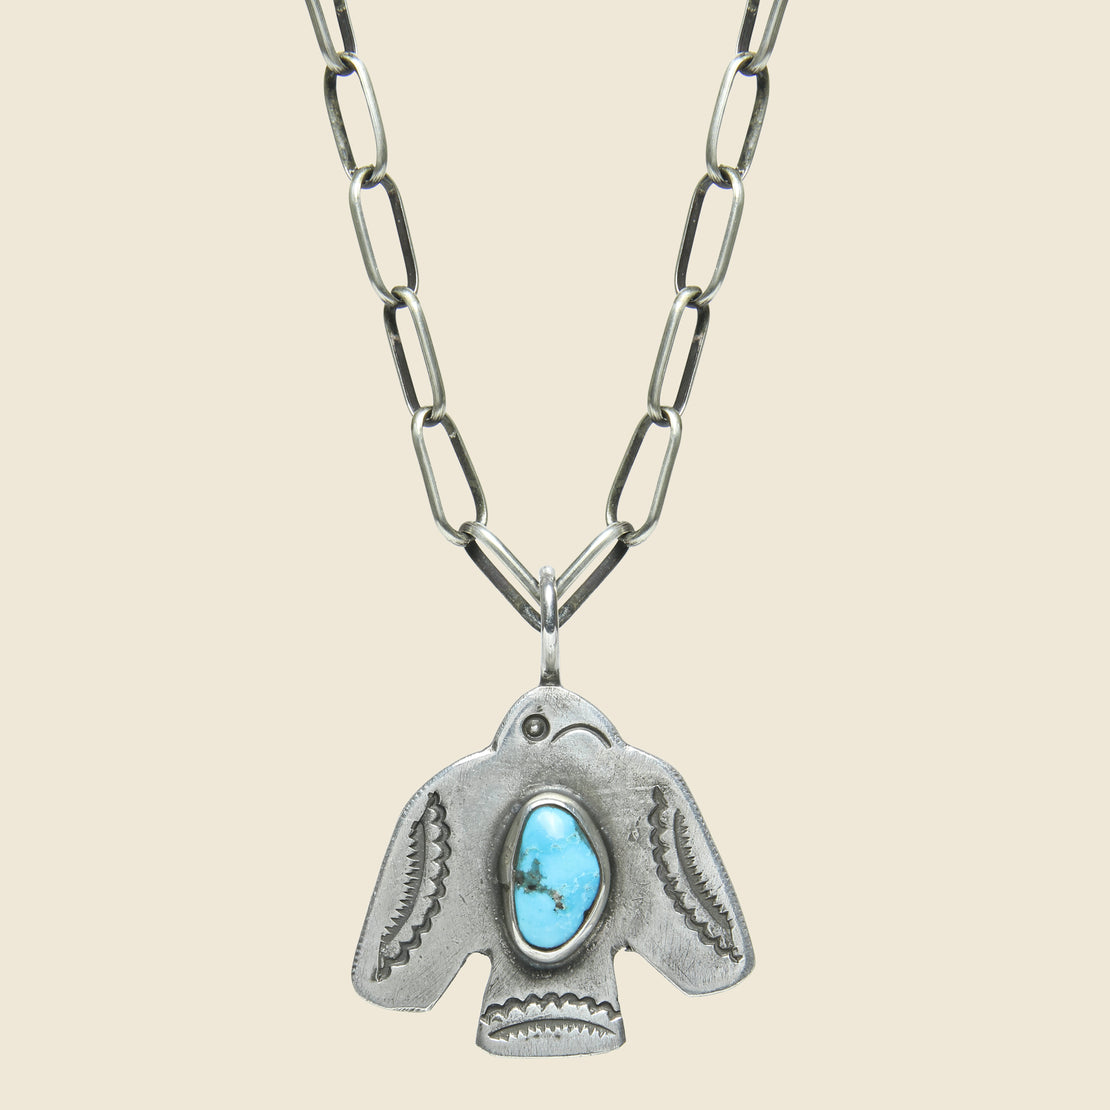 Smith Bros. Trading Co. Scallop Tail Thunderbird Pendant Necklace - Sterling/Turquoise